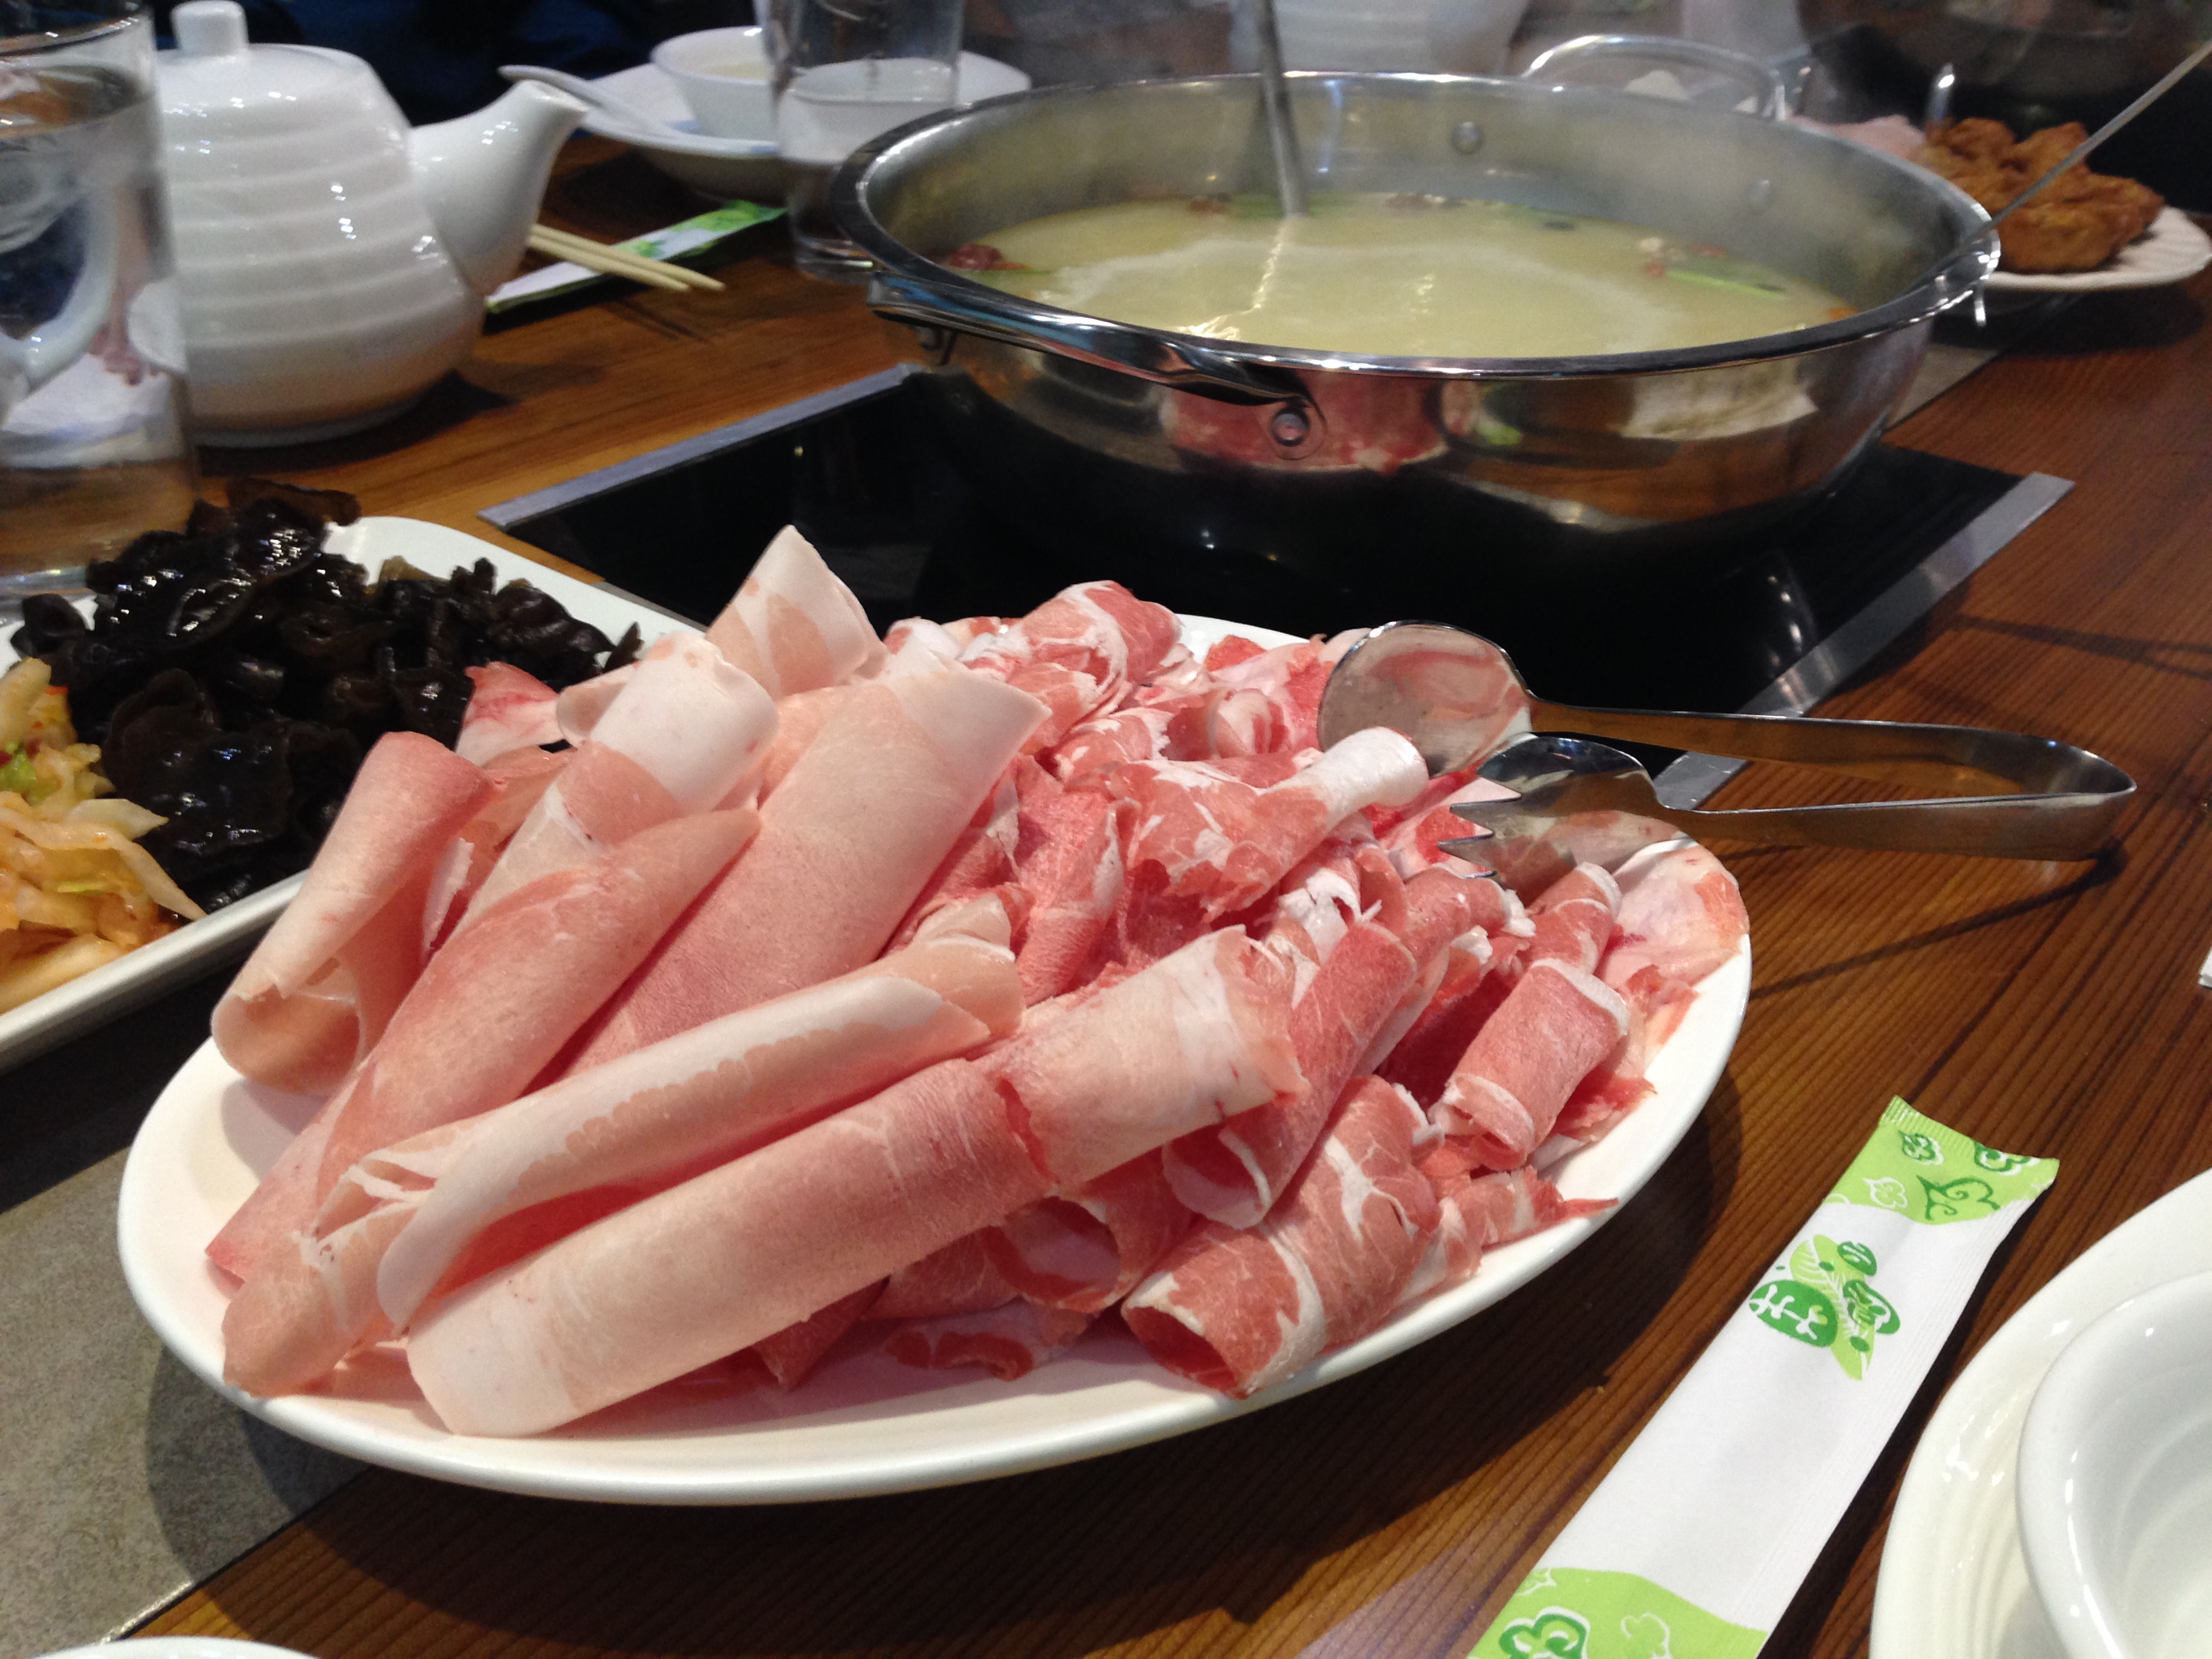 While Little Sheep Mongolian Hot Pot restaurants are ubiquitous throughout China, besides